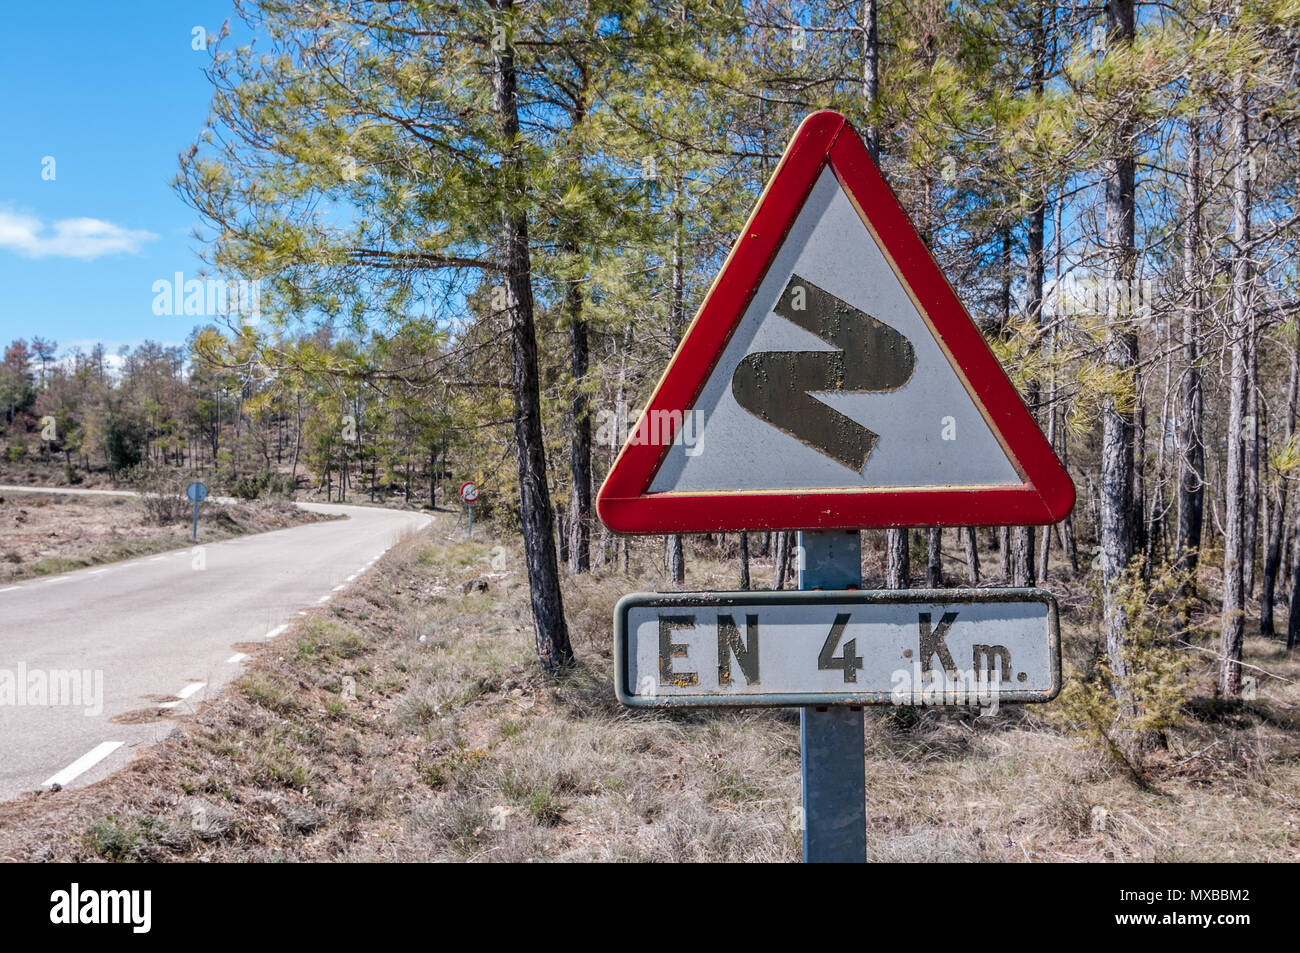 Dangerous curves ahead, first to right, in 4 Km, spanish traffic sign, country side road, Spain Stock Photo